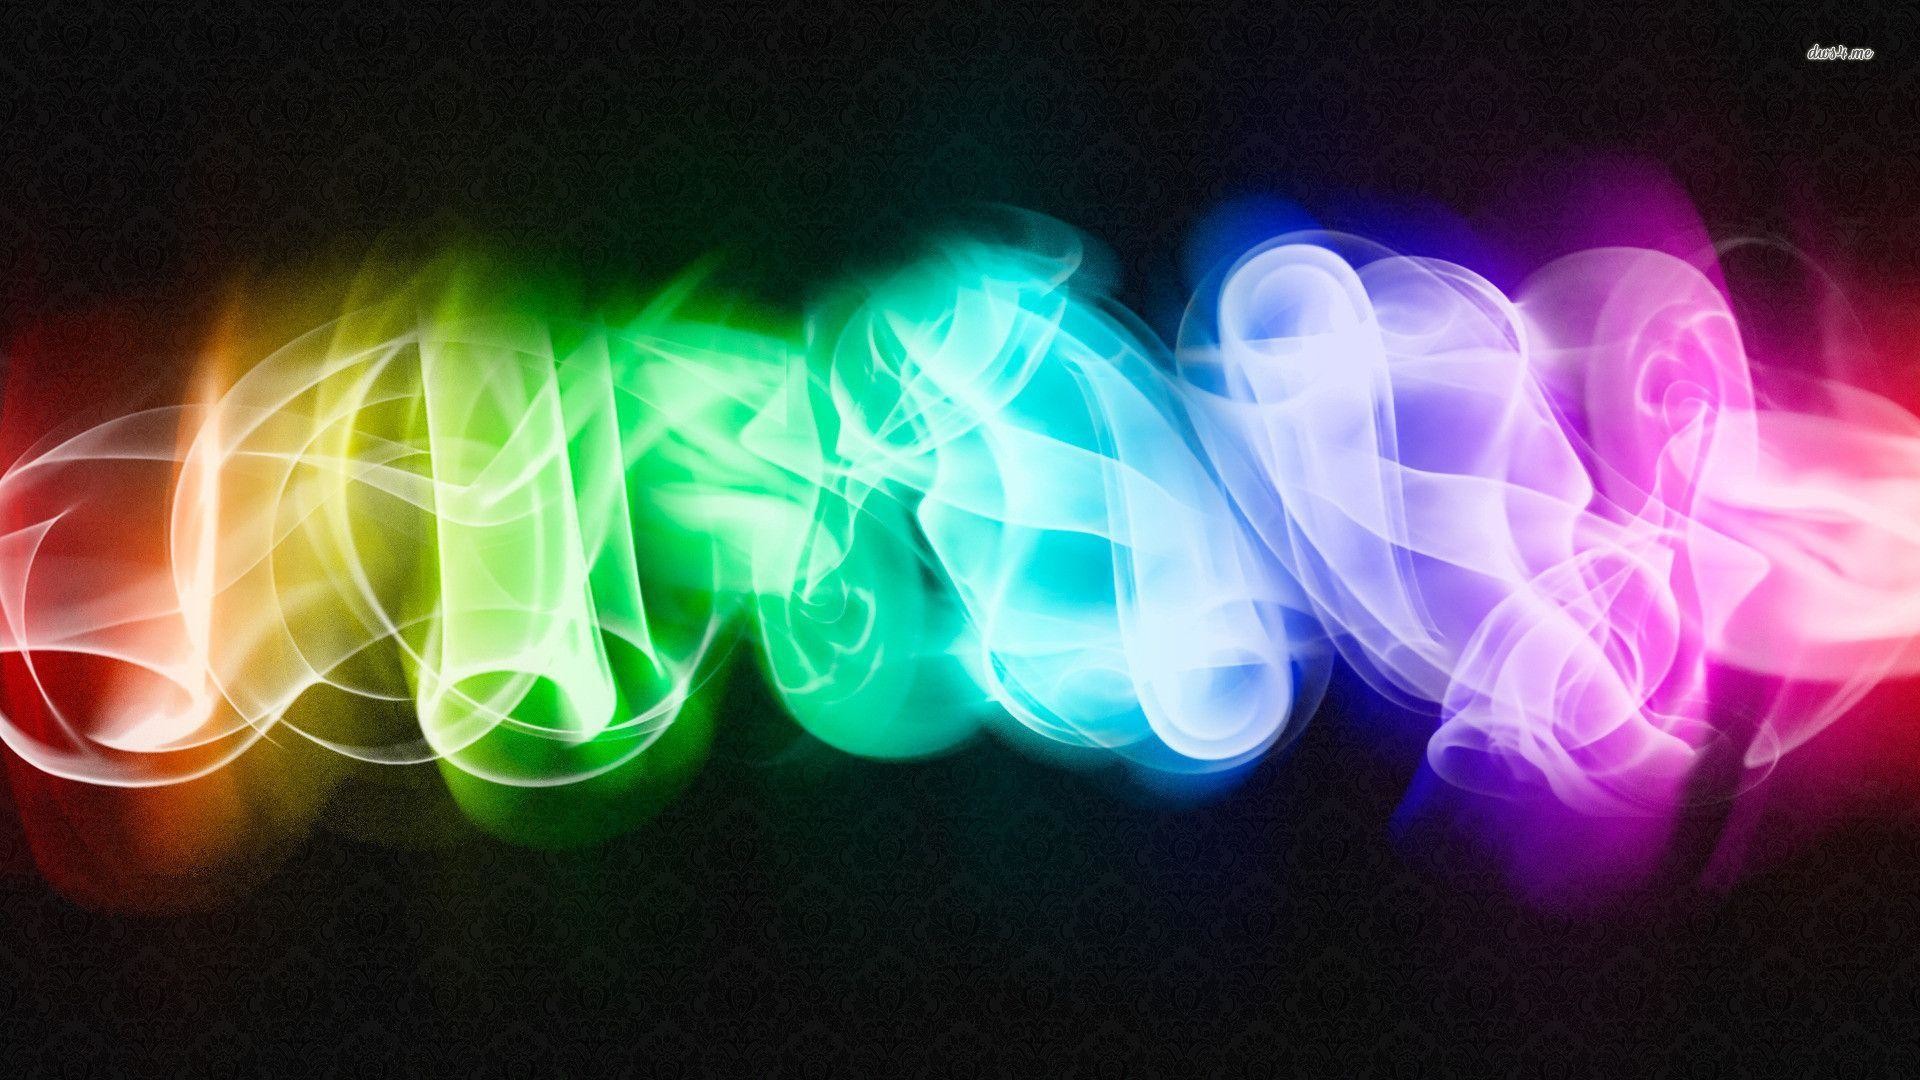 1920x1080 Wallpapers For > Colorful Neon Smoke Backgrounds